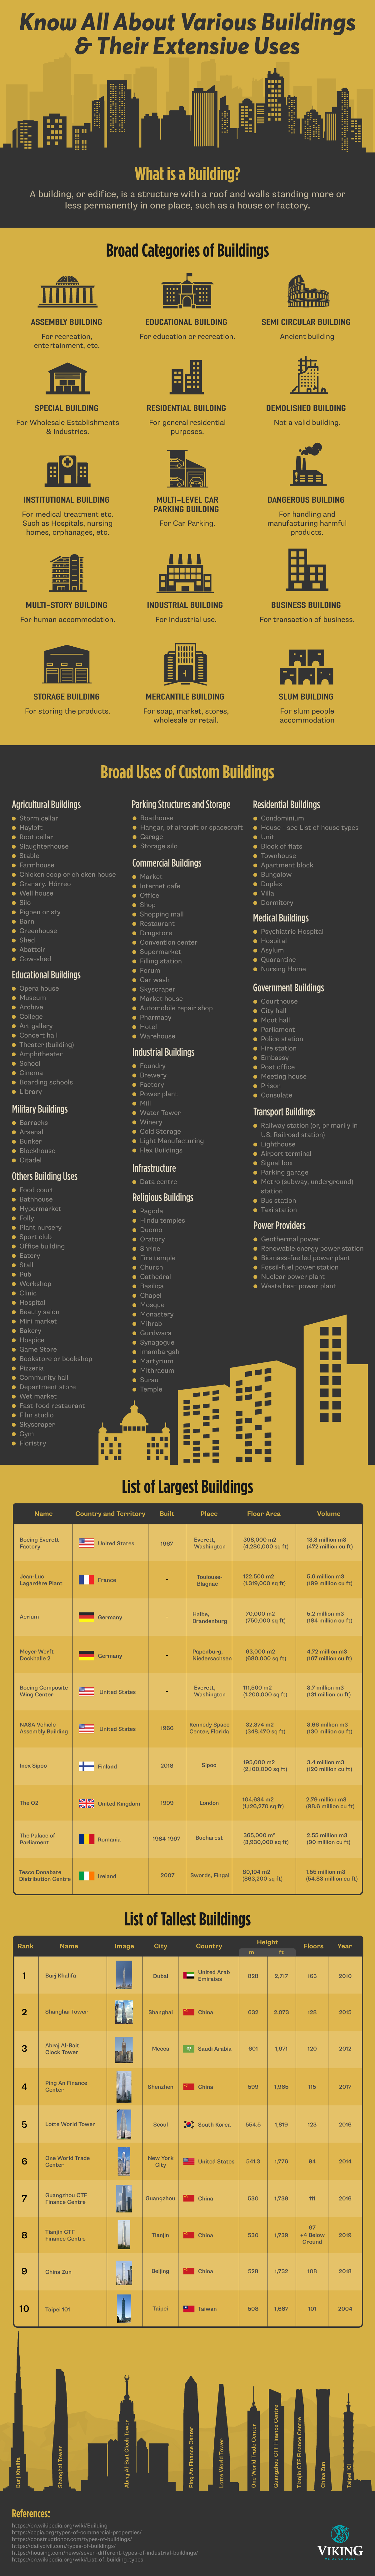 Know All About Various Buildings & Their Extensive Uses